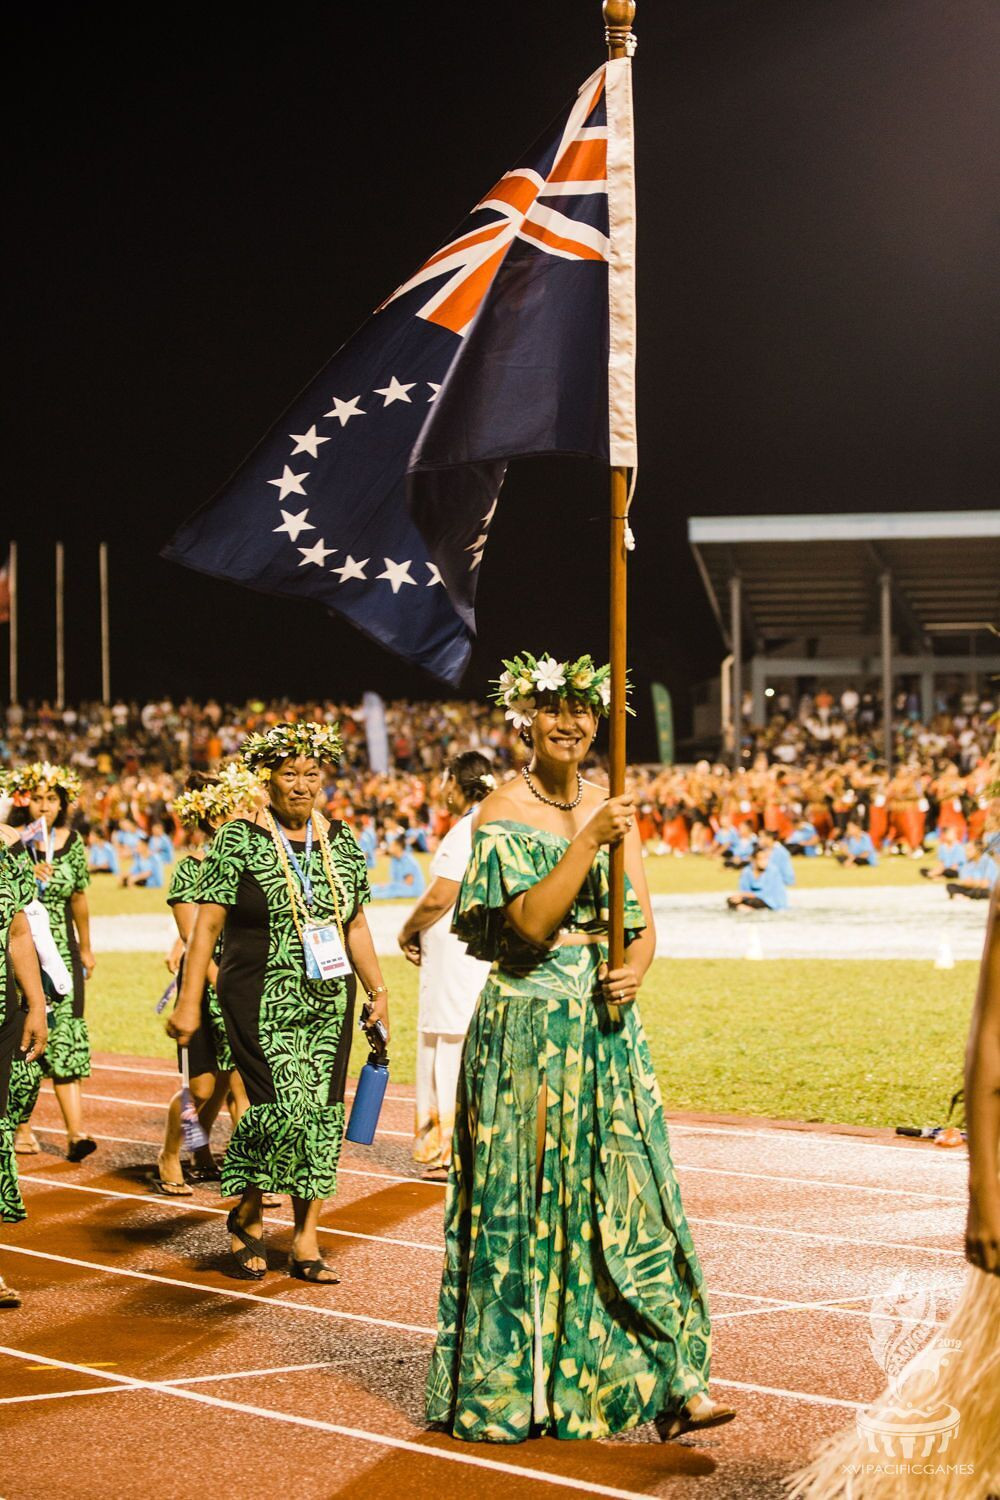 The Cook Islands team at the 2019 Pacific Games have slammed reports in their home country that four swimmers were banned from the competition on eligibility grounds ©Pacific Games News Service